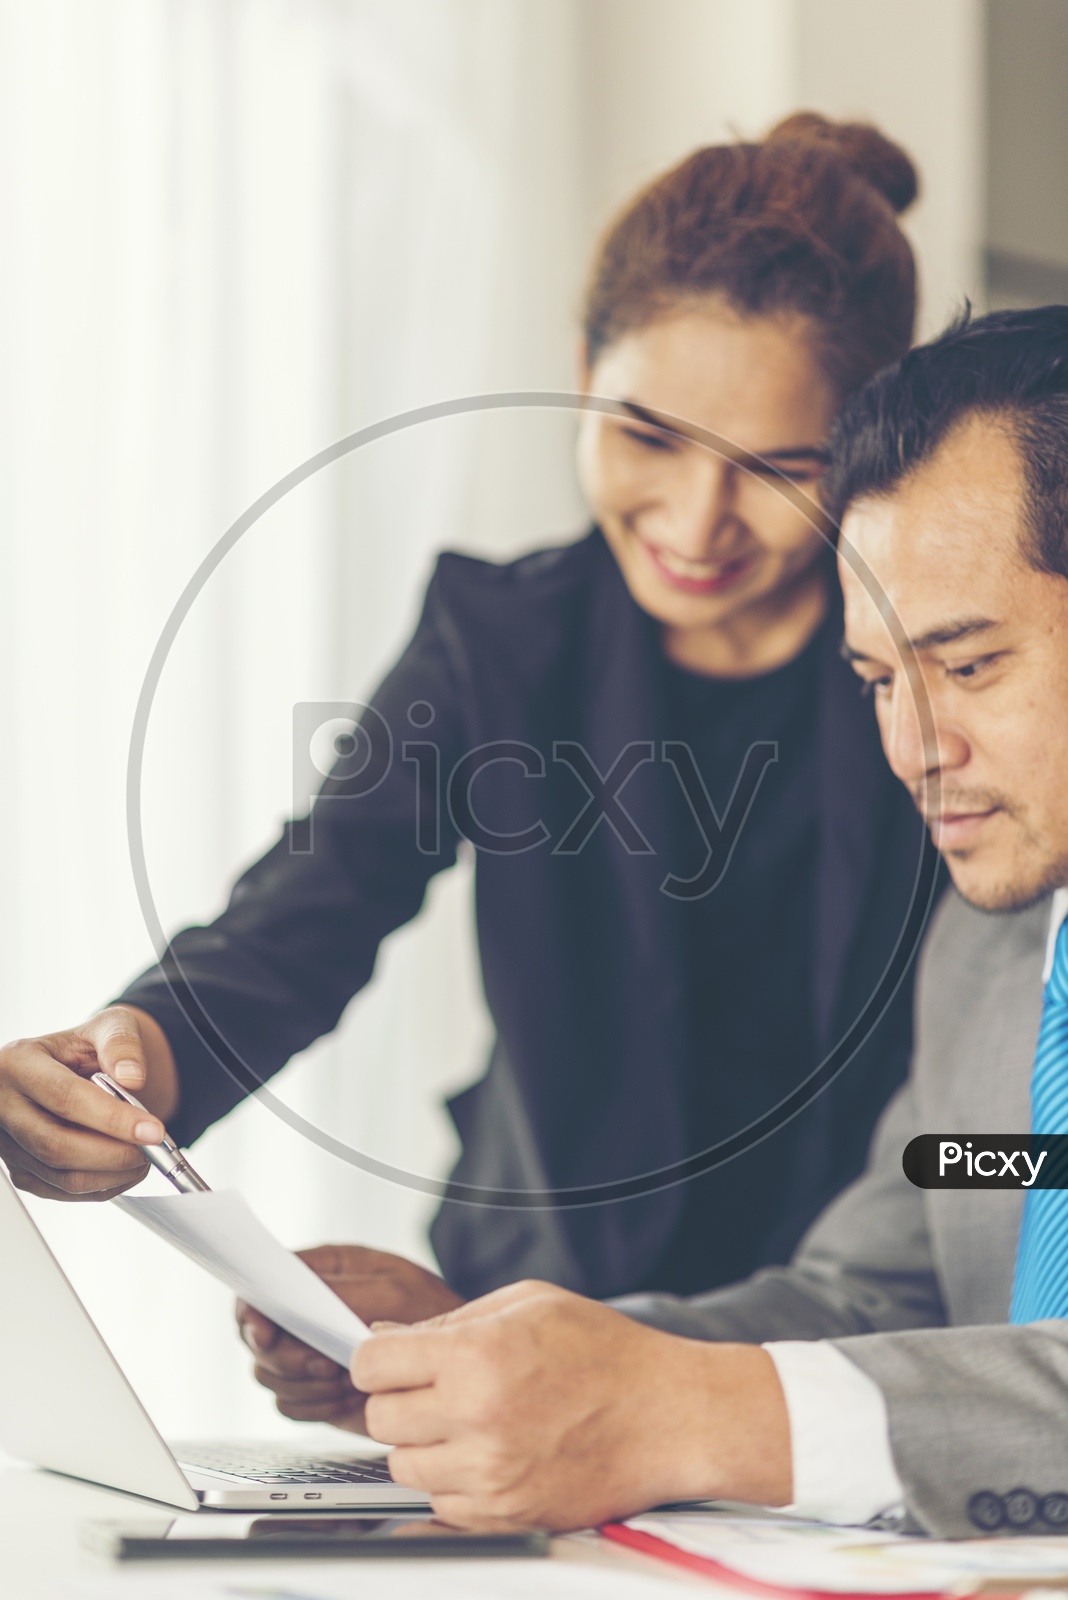 Employees Discussing Business Plans or Progress in Office Desk Background